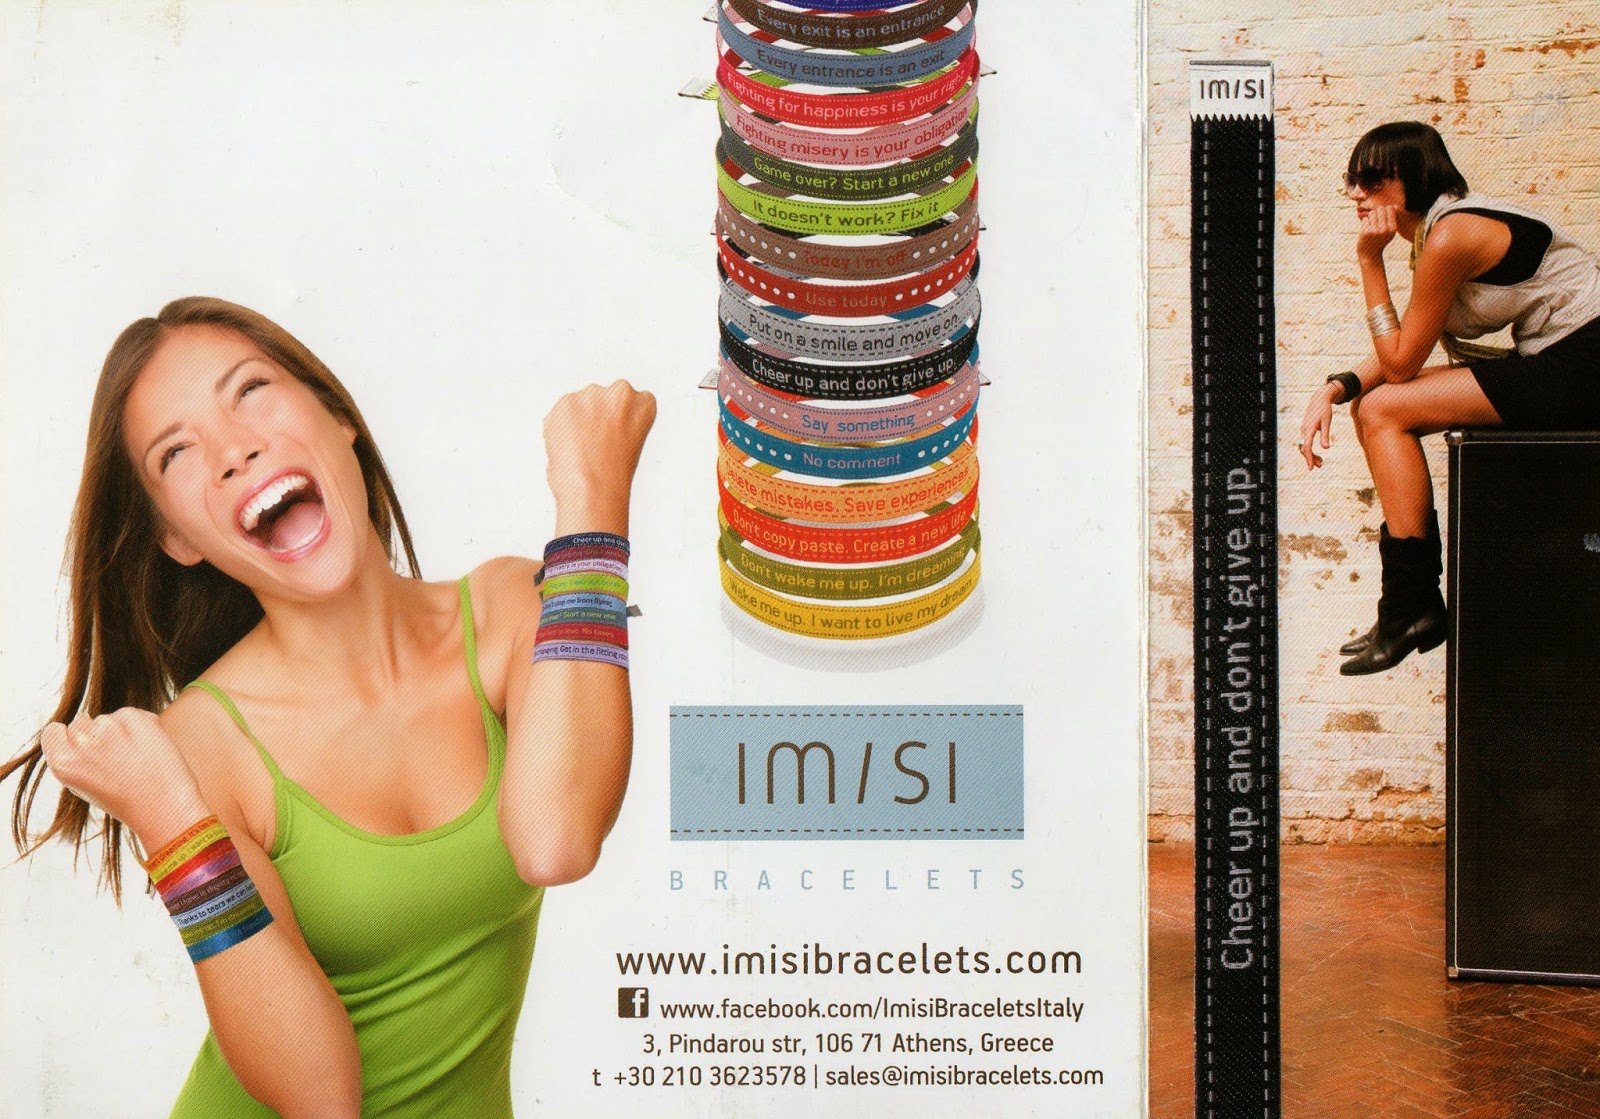 http://www.imisibracelets.com/index.php?route=common/home